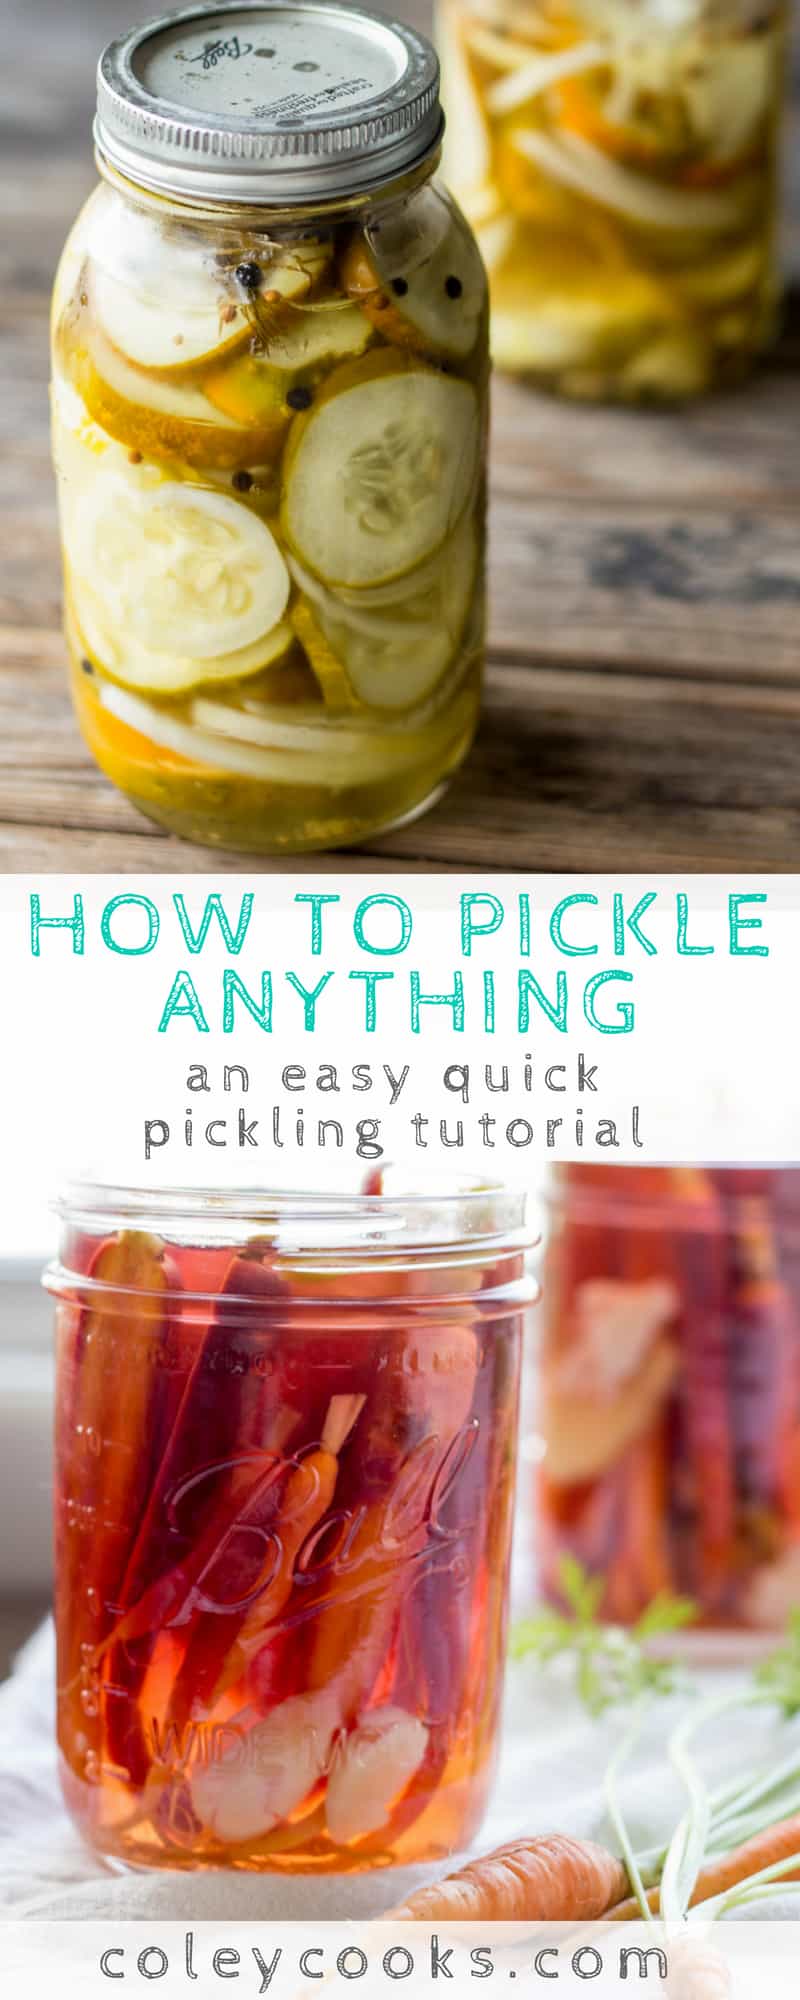 HOW TO PICKLE ANYTHING | This easy pickling tutorial teaches you how to make quick refrigerator pickles that can be applied to any vegetable! #easy #pickling #tutorial #recipe | ColeyCooks.com